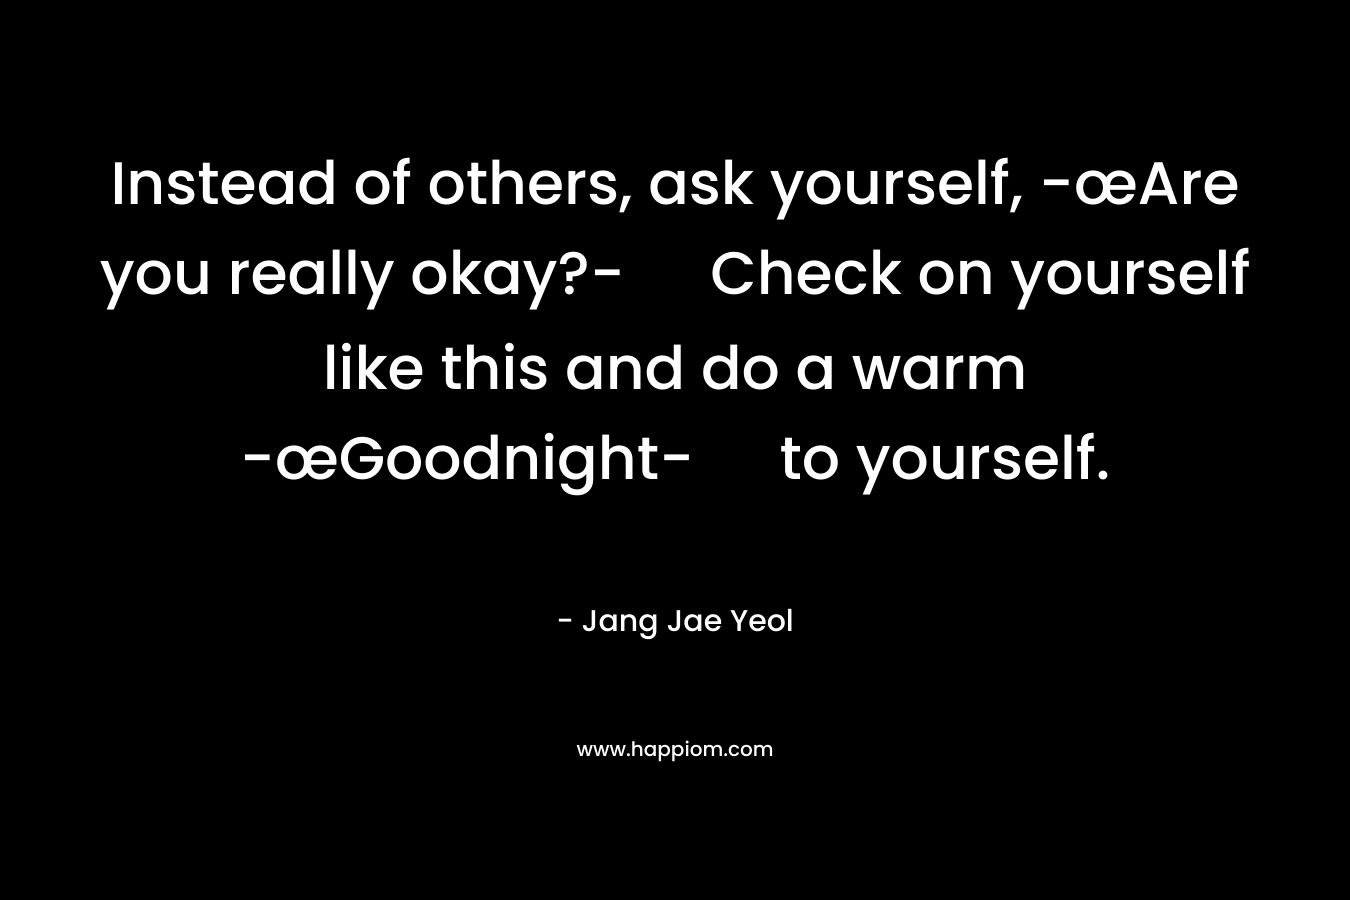 Instead of others, ask yourself, -œAre you really okay?- Check on yourself like this and do a warm -œGoodnight- to yourself.